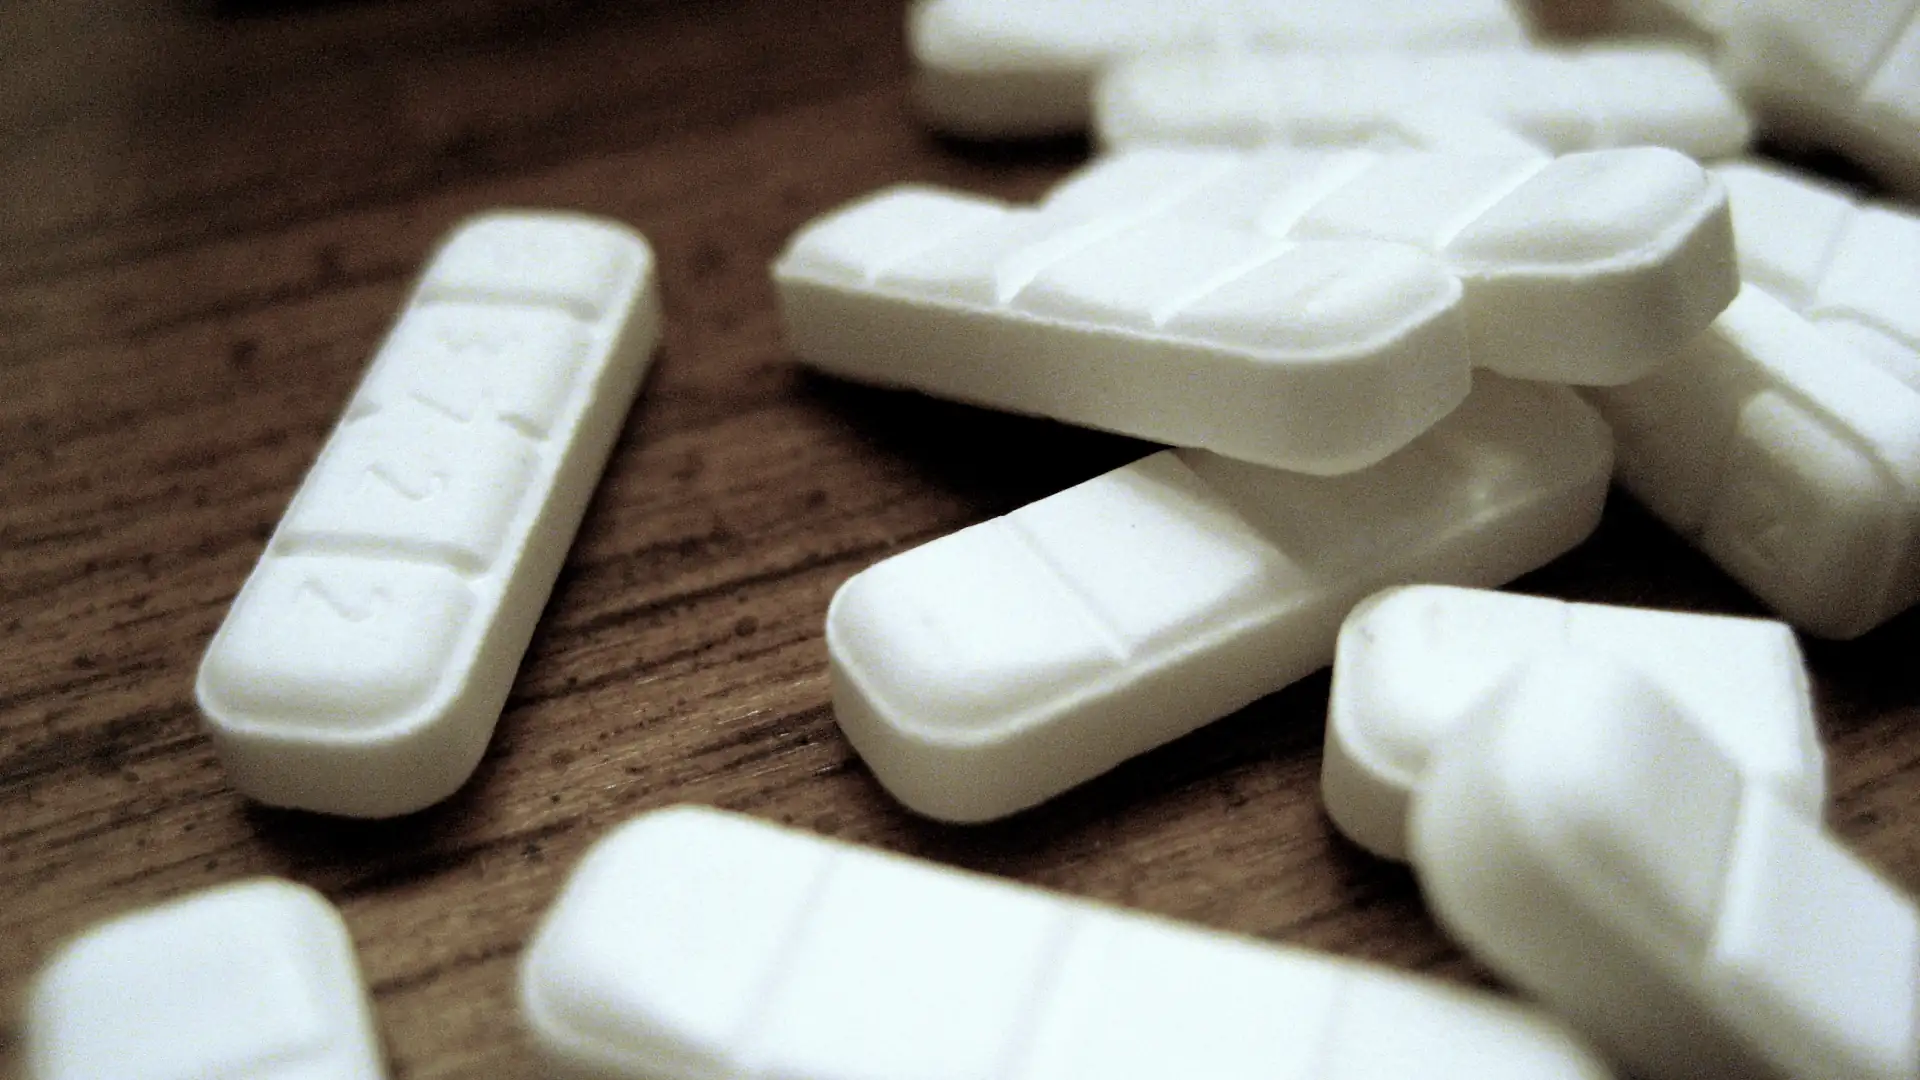 Xanax Bars What Are They And Everything You Need To Know